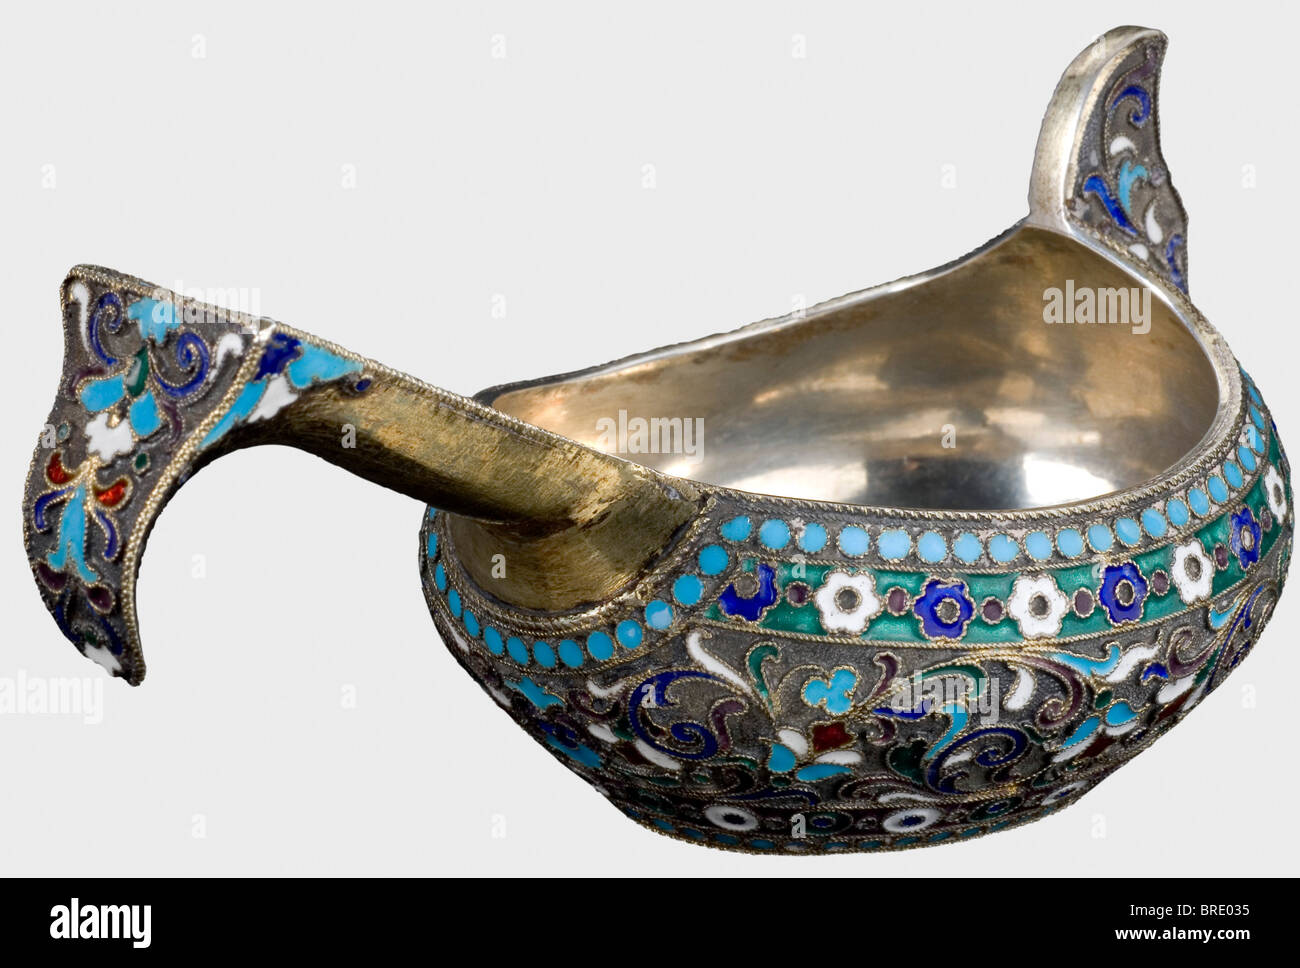 A silver cloisonné kovsch, Moscow, circa 1910 Cyrillic master's mark 'MZ'. Silver, partially gilt, and filigree, floral enamel work. Moscow hallmark for '84' zolotniki. Weight 93 g. Length 105 mm. Provenance: Grand Duchess Vera Konstantinovna Romanova (1854 - 1912). historic, historical, 1910s, 20th century, vessel, vessels, object, objects, stills, clipping, clippings, cut out, cut-out, cut-outs, Stock Photo